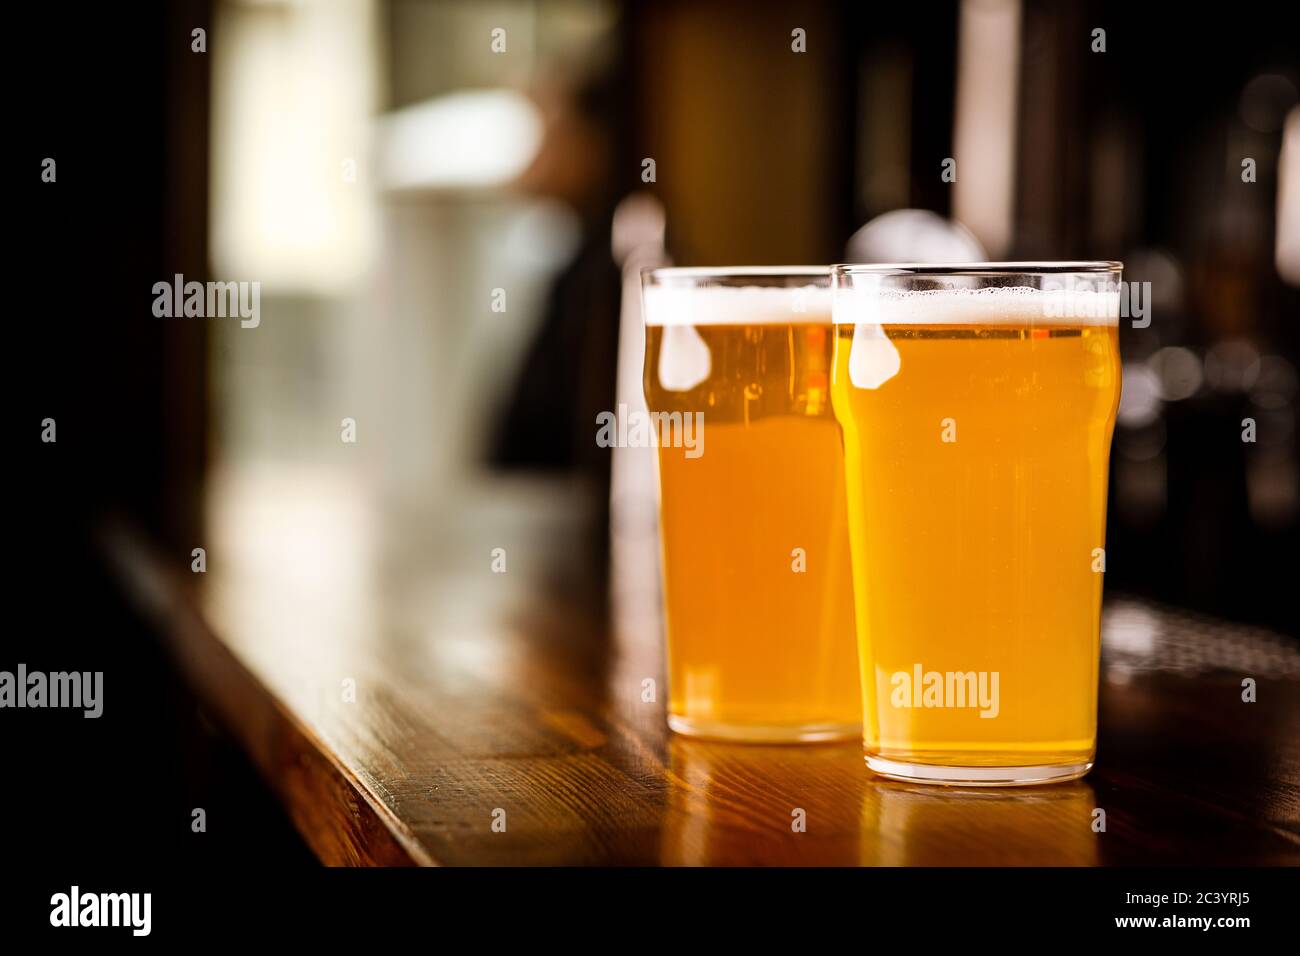 Evening meeting in pub. Two glasses with light beer on wooden bar counter Stock Photo